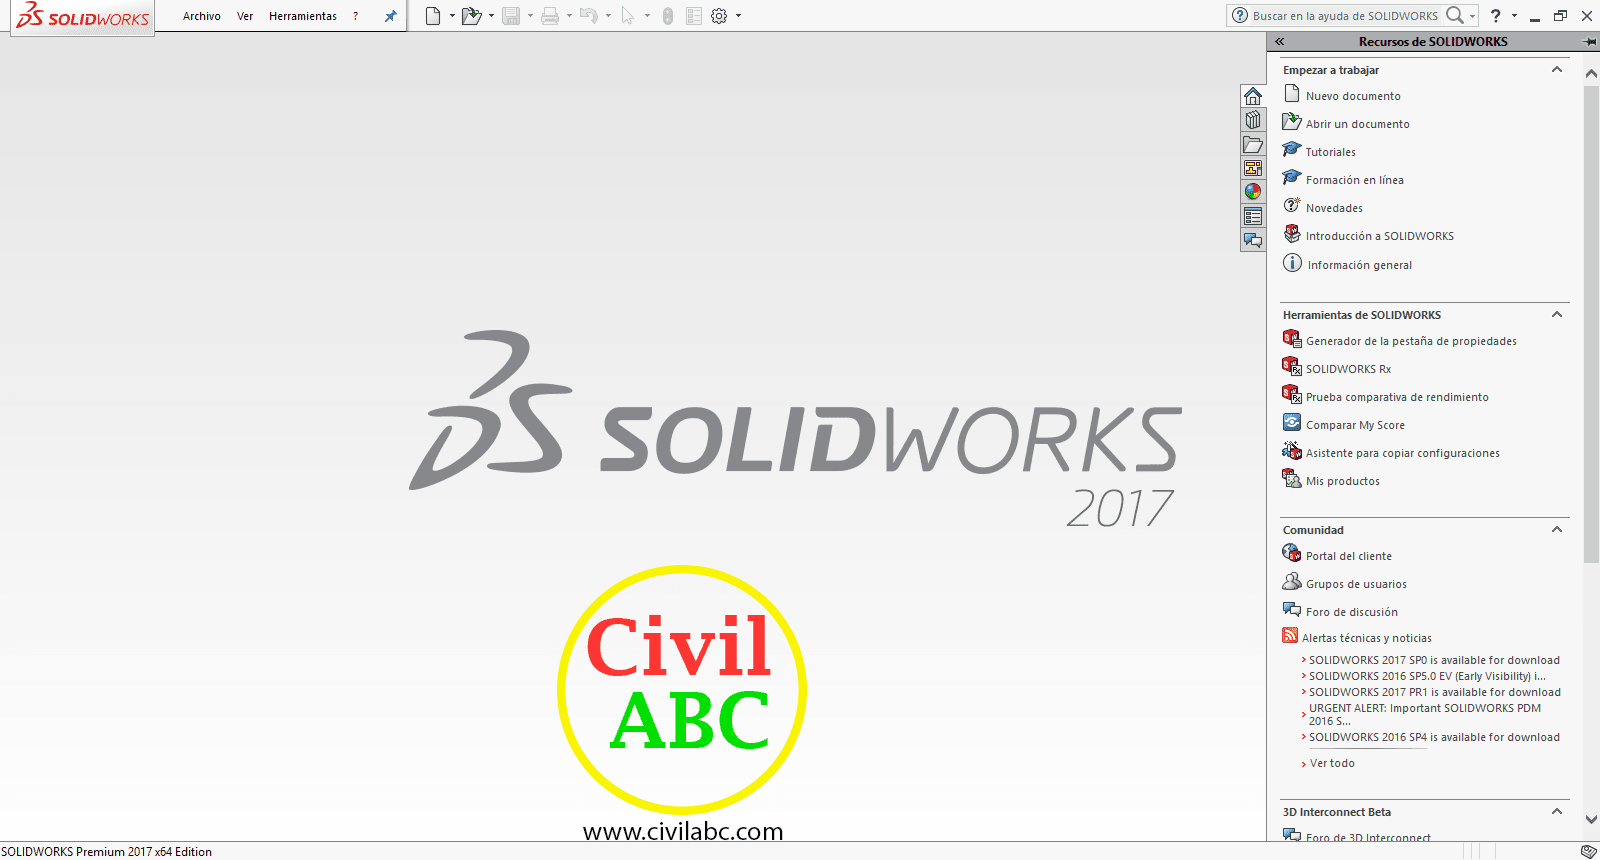 solidworks 2012 free download full version with crack 64 bit